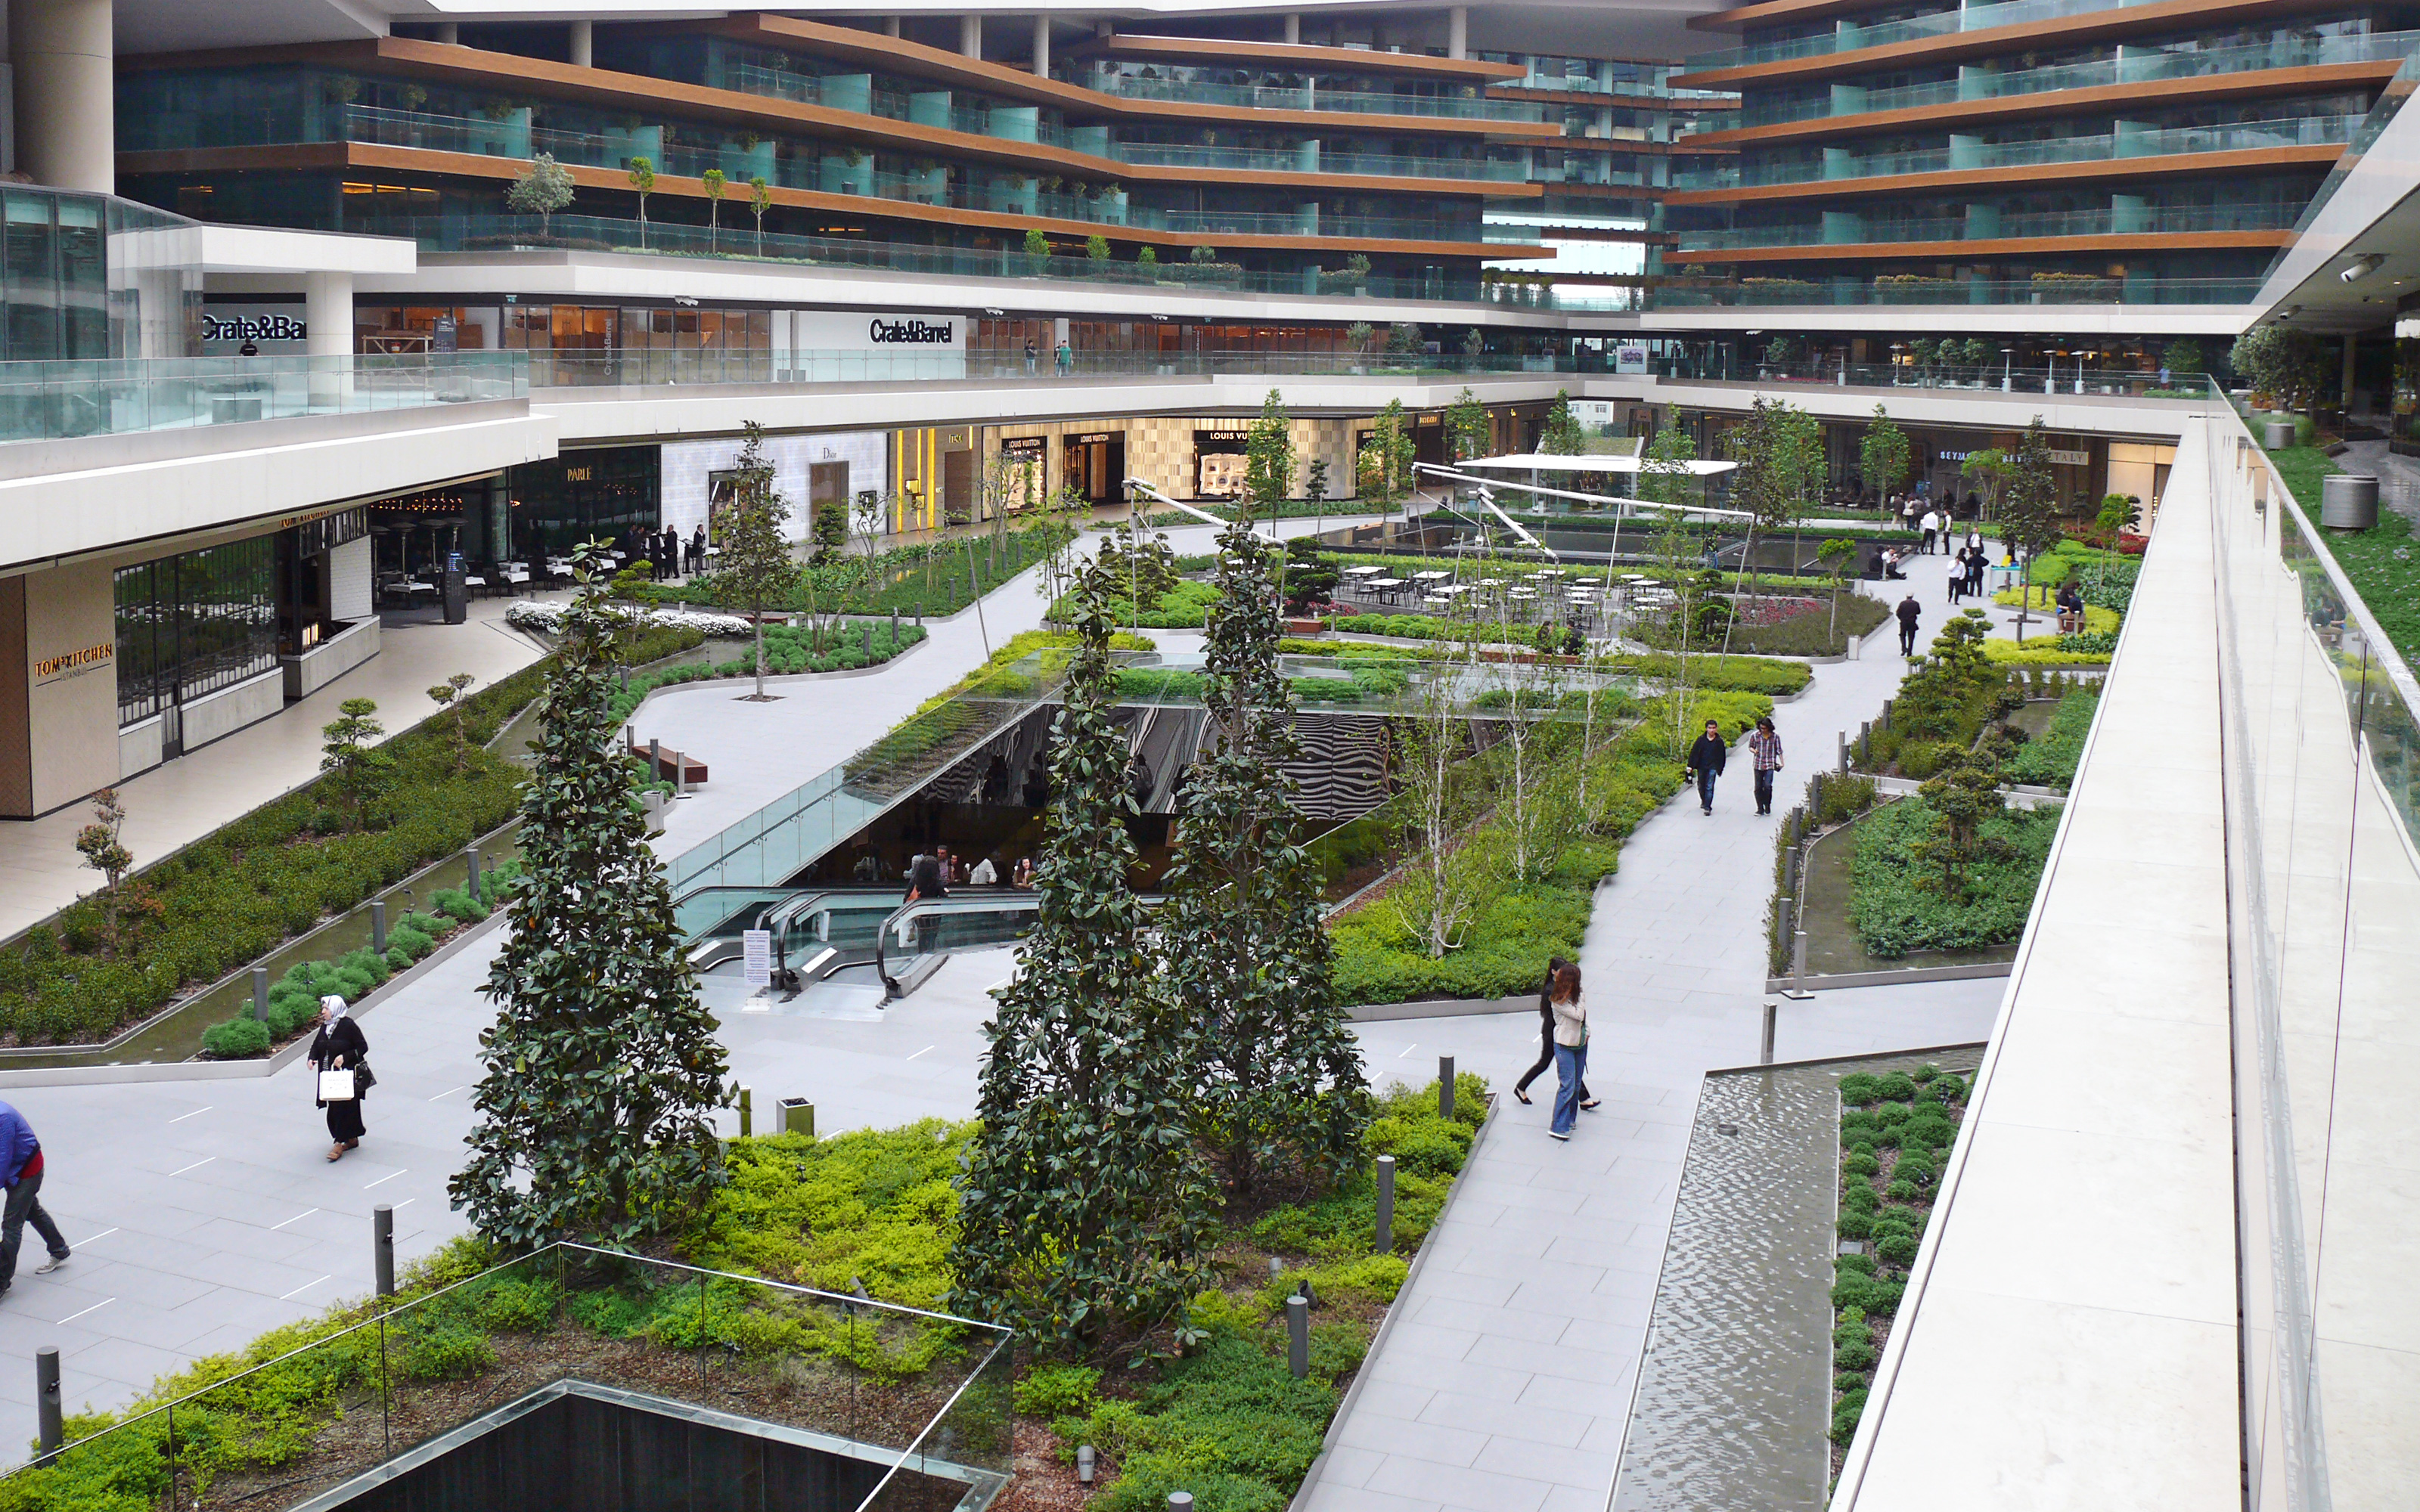 Bird's eye view of the vegetated main square with escalators